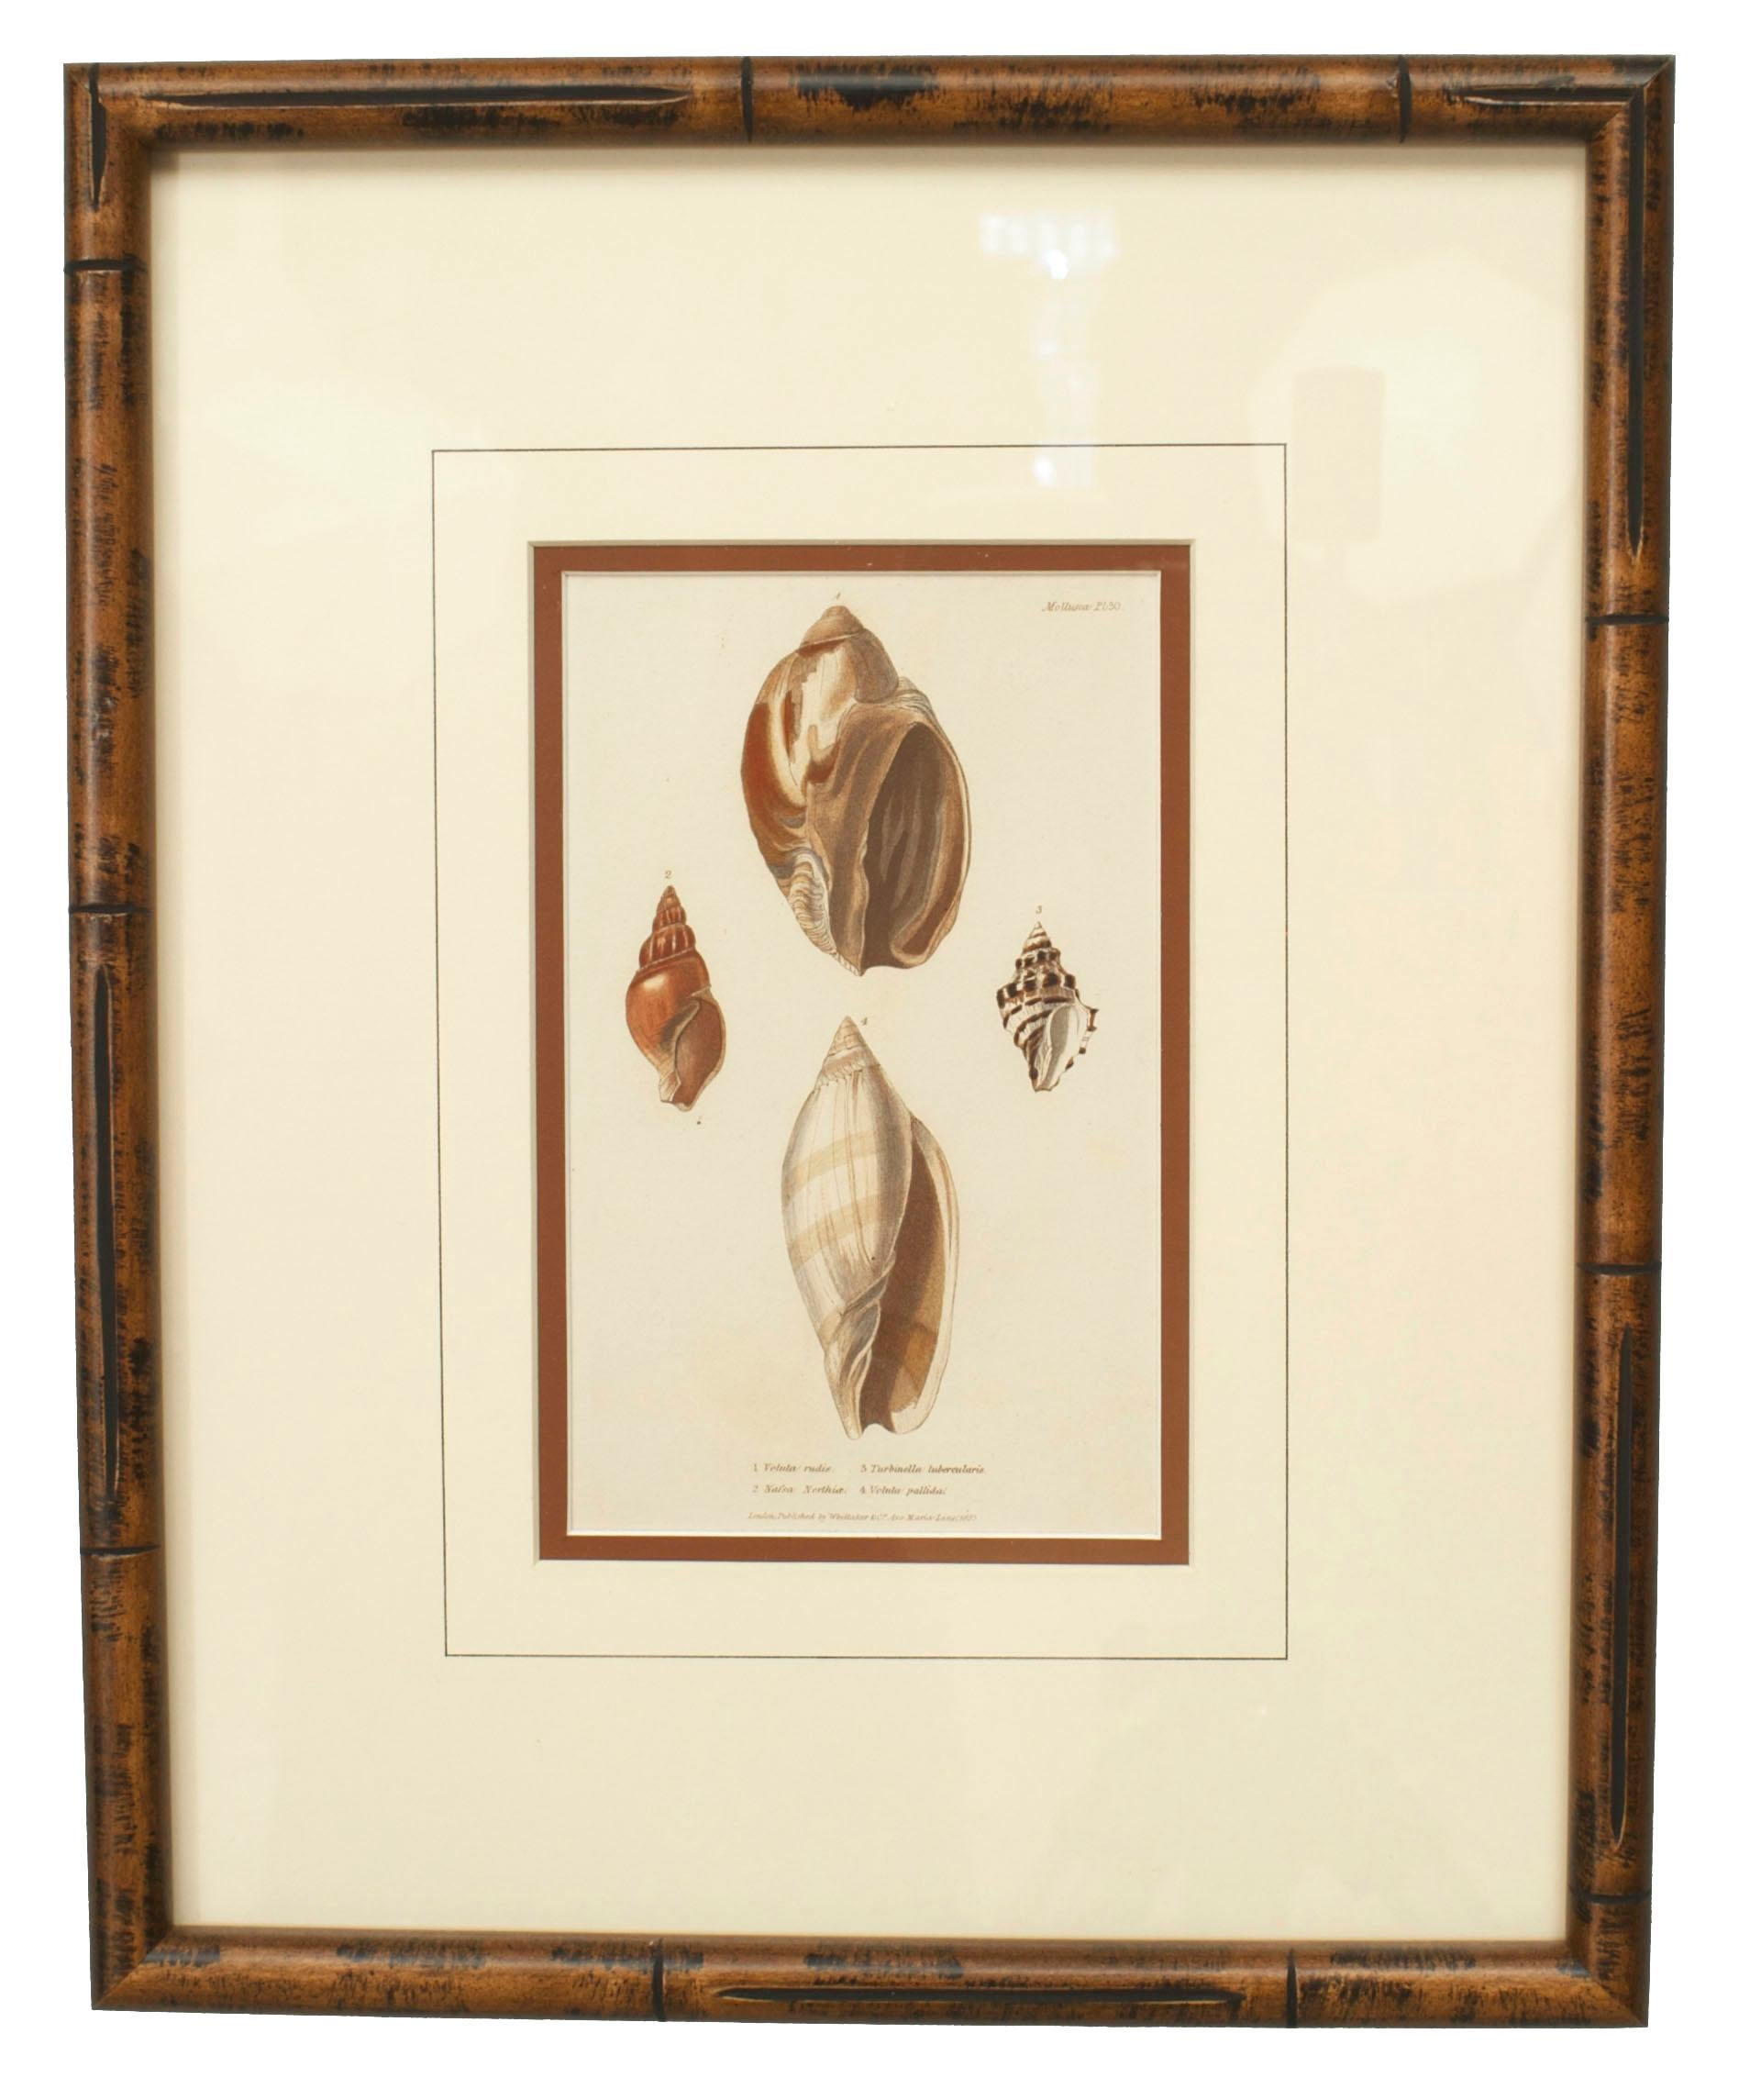 Set of 4 English Victorian colored lithographs of various sea shells in a brown wood frame (published by Whittiker & Co, London).
 